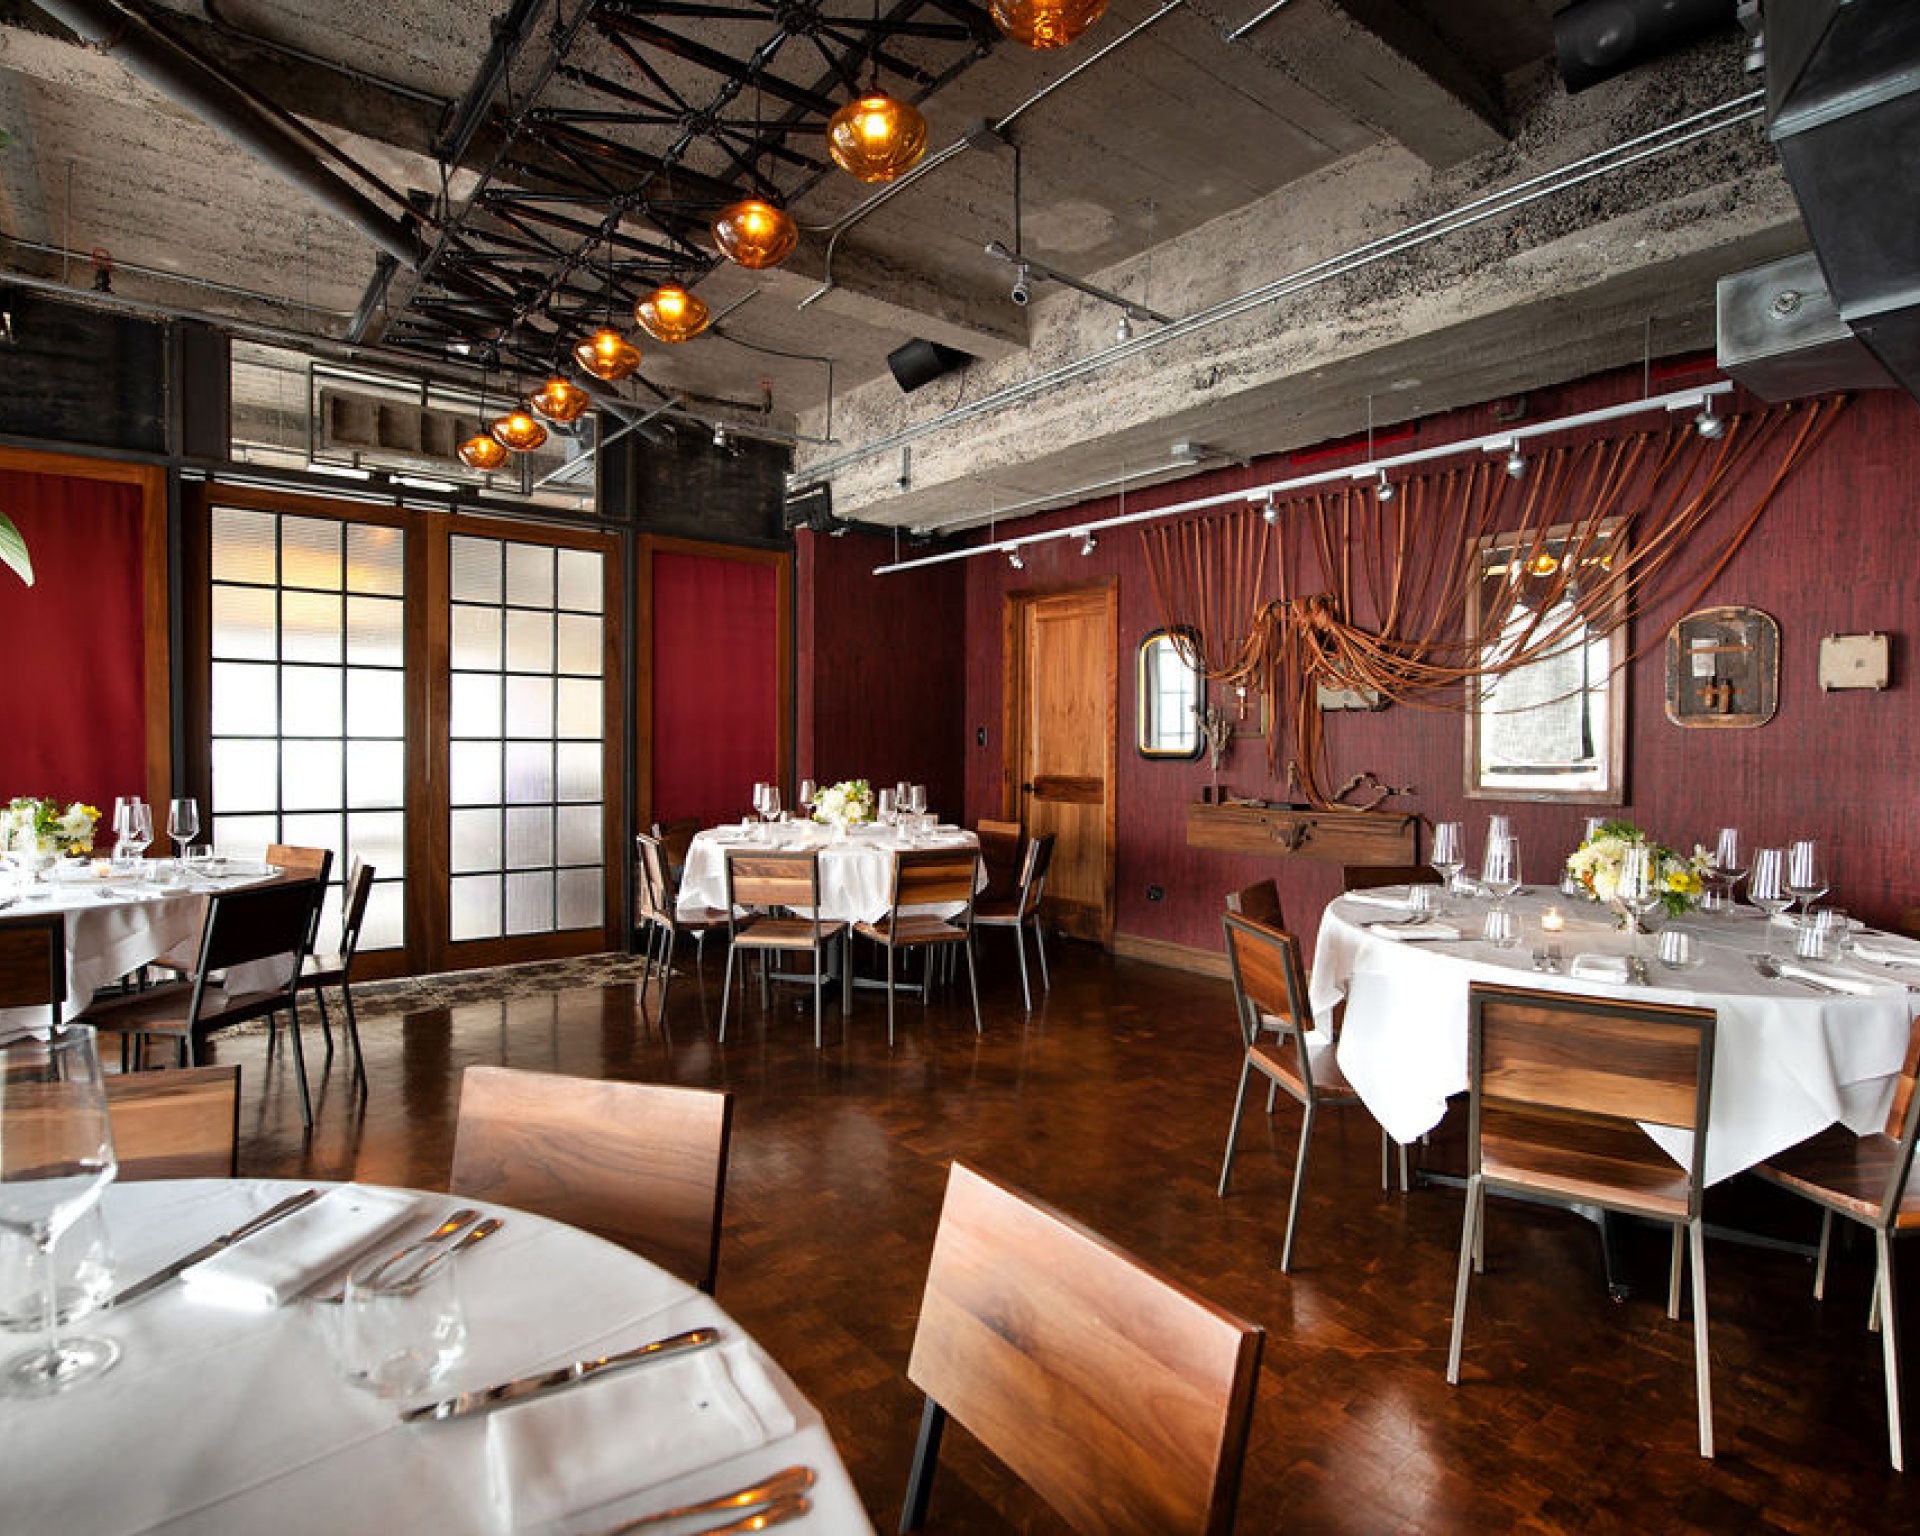 View of the 57 Room, with multiple round tables, exposed concrete ceiling, wood floors, and rustic decor on dark red walls